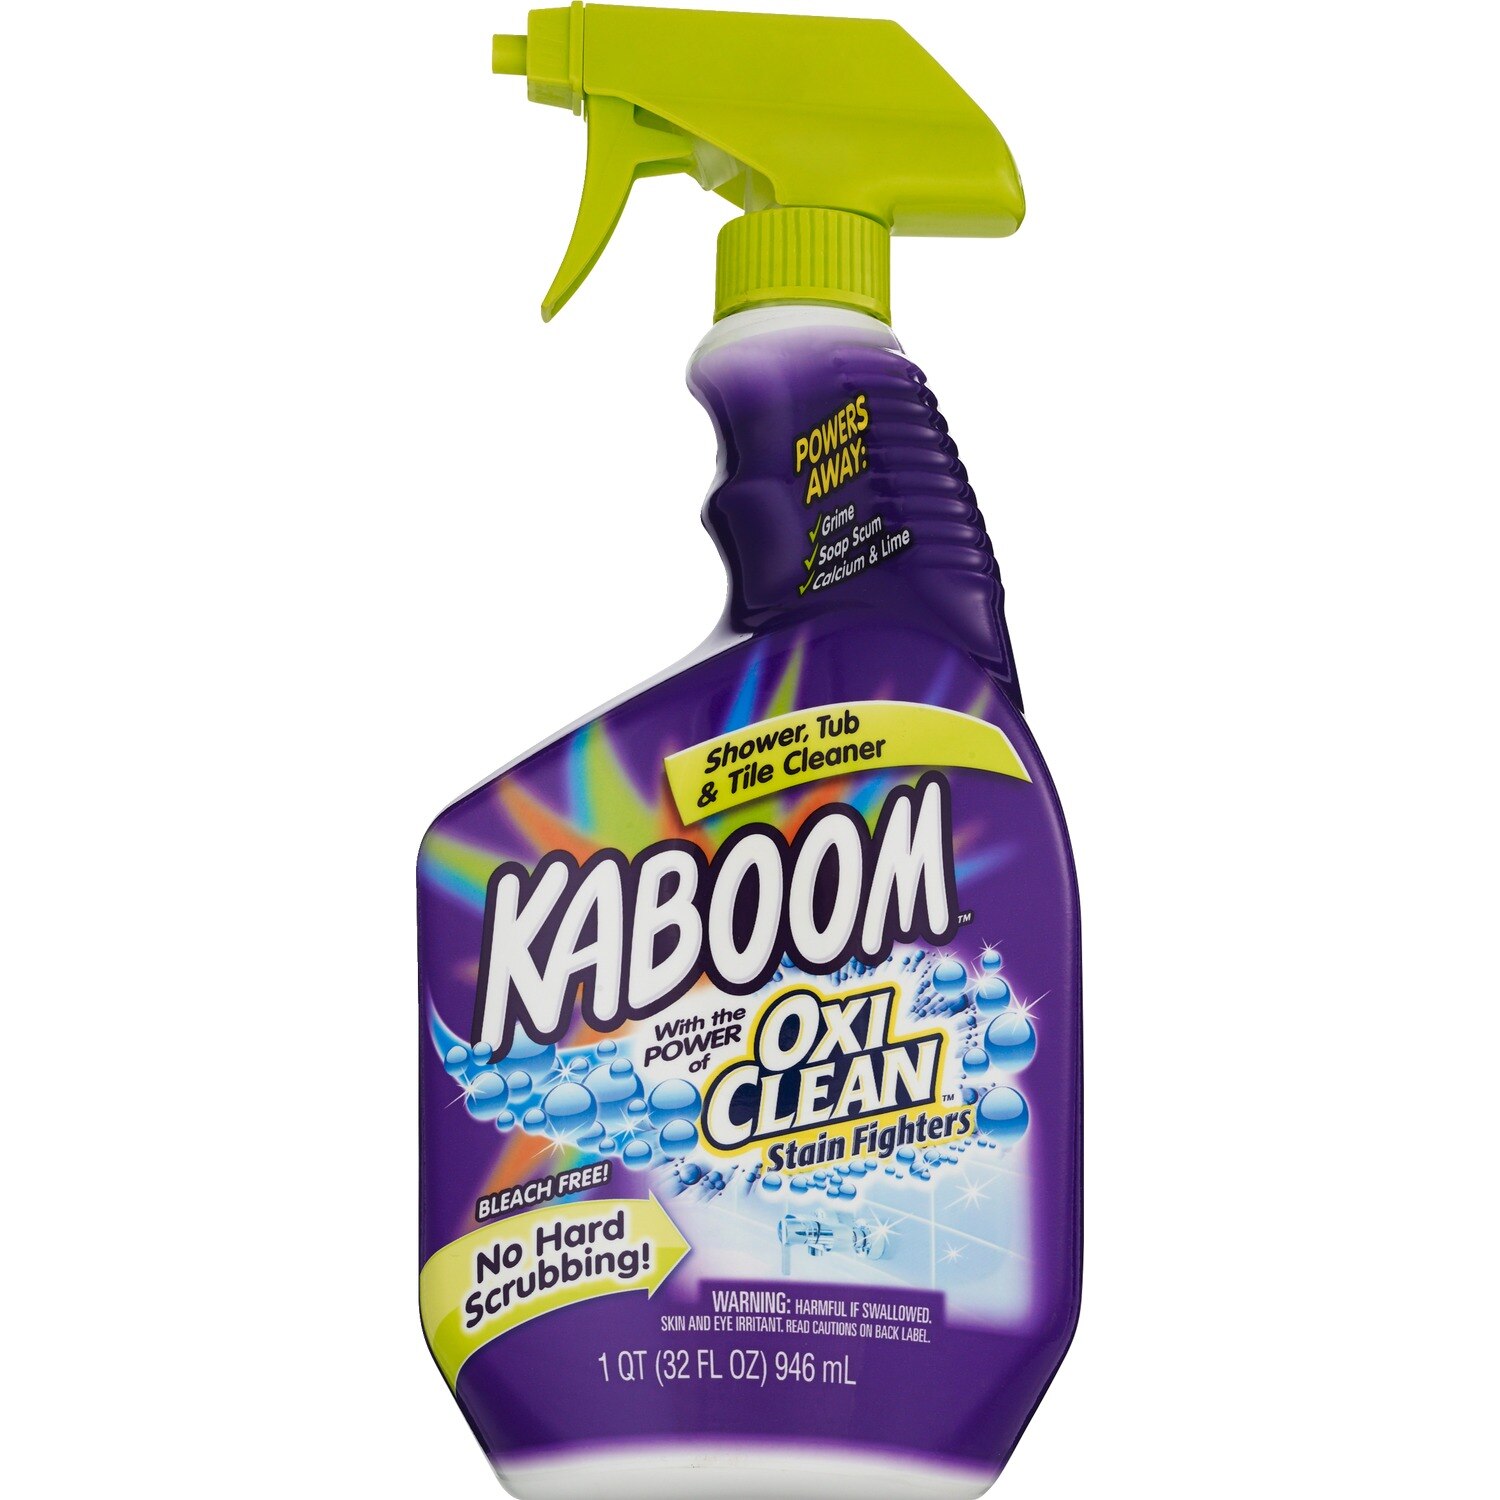 Kaboom Shower, Tub & Tile Cleaner with the Power of Oxi Clean